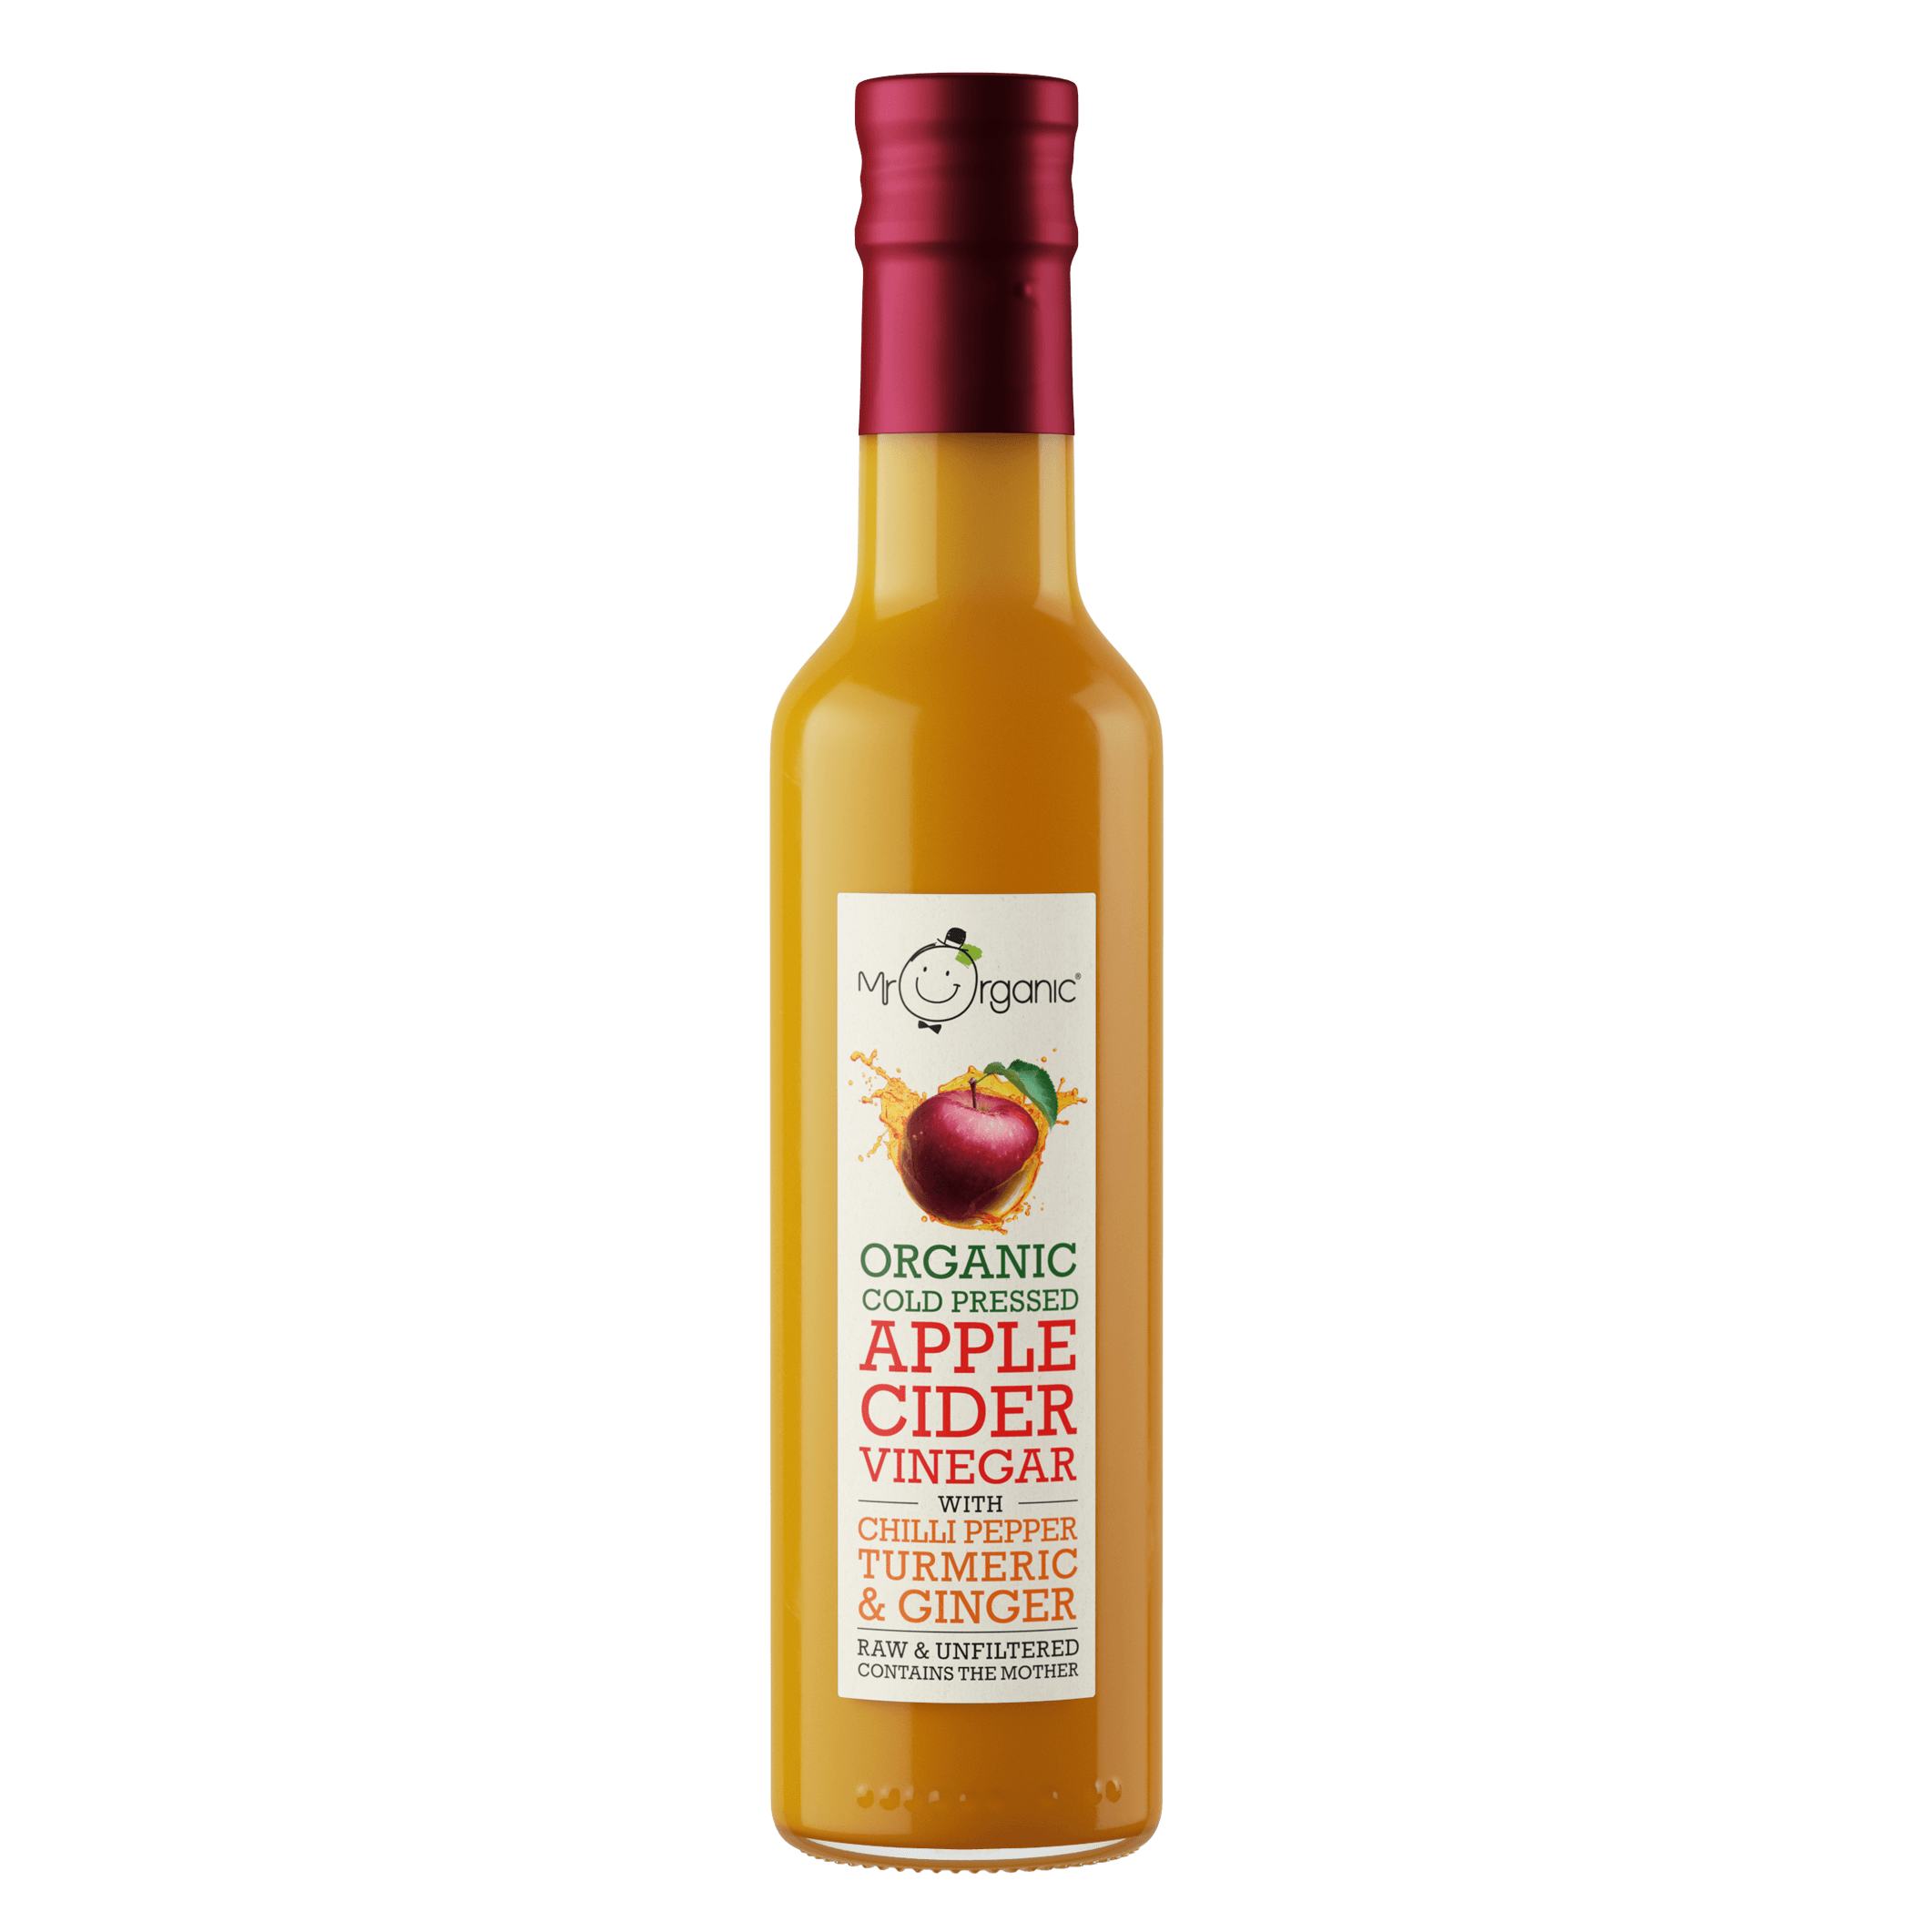 Organic Cold Pressed Apple Cider Vinegar with Chilli Pepper, Turmeric and Ginger